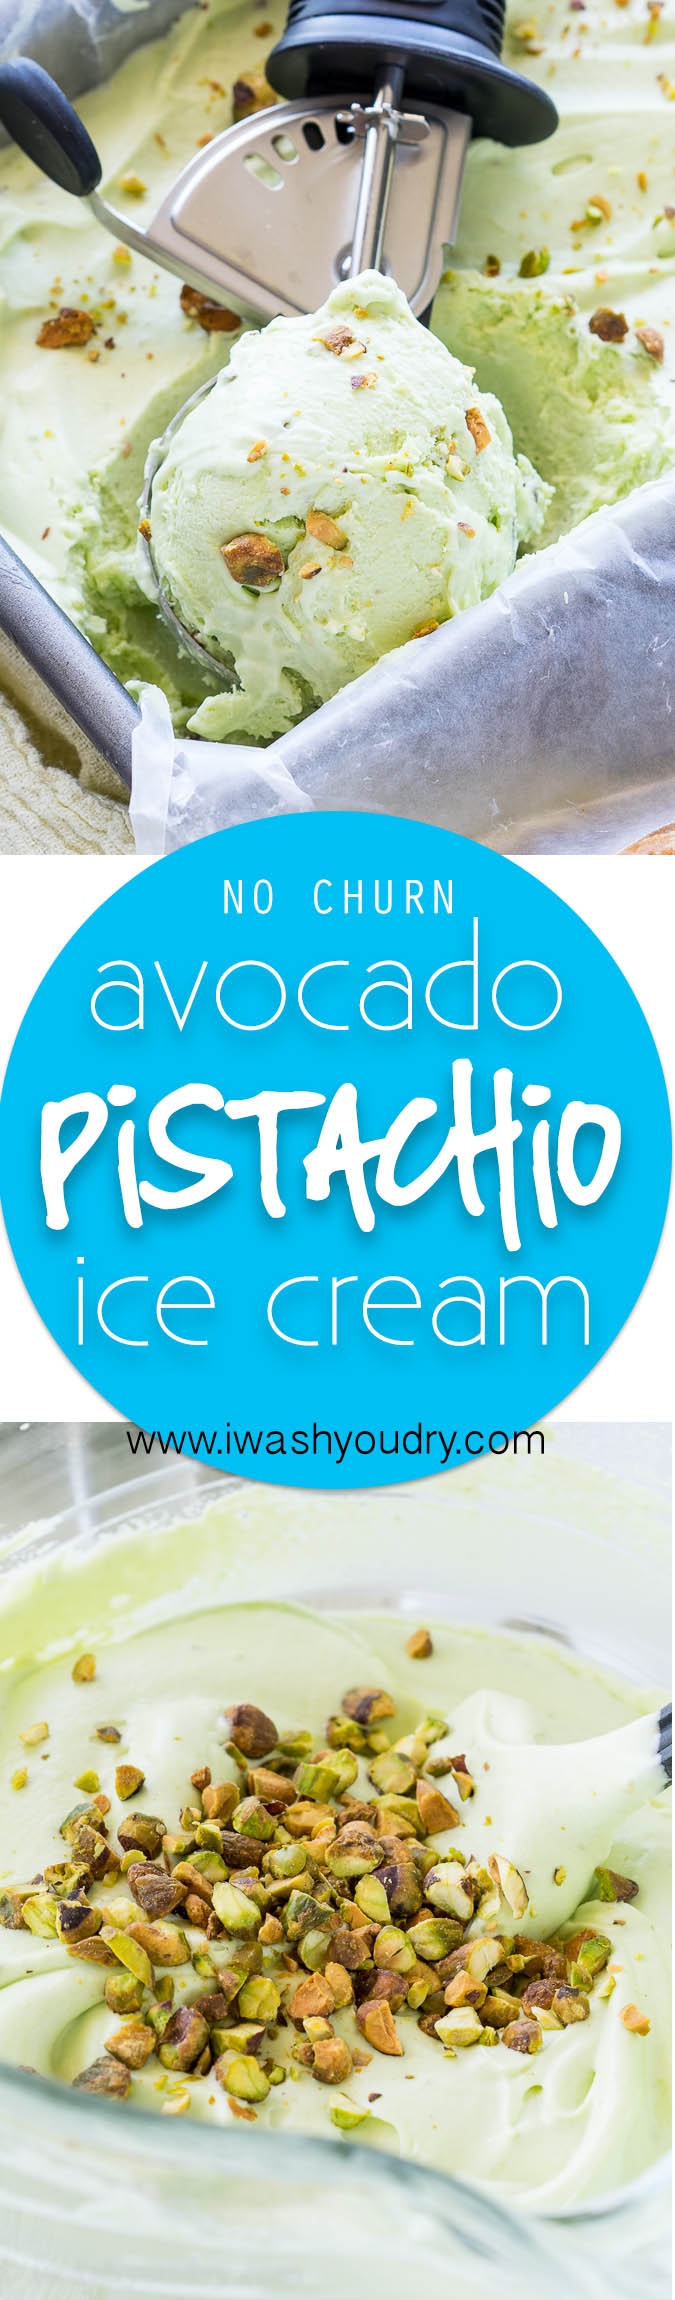 Wow! you can not believe how creamy this NO CHURN Avocado Pistachio Ice Cream is! You can't taste the avocado, it just makes the ice cream extra creamy!